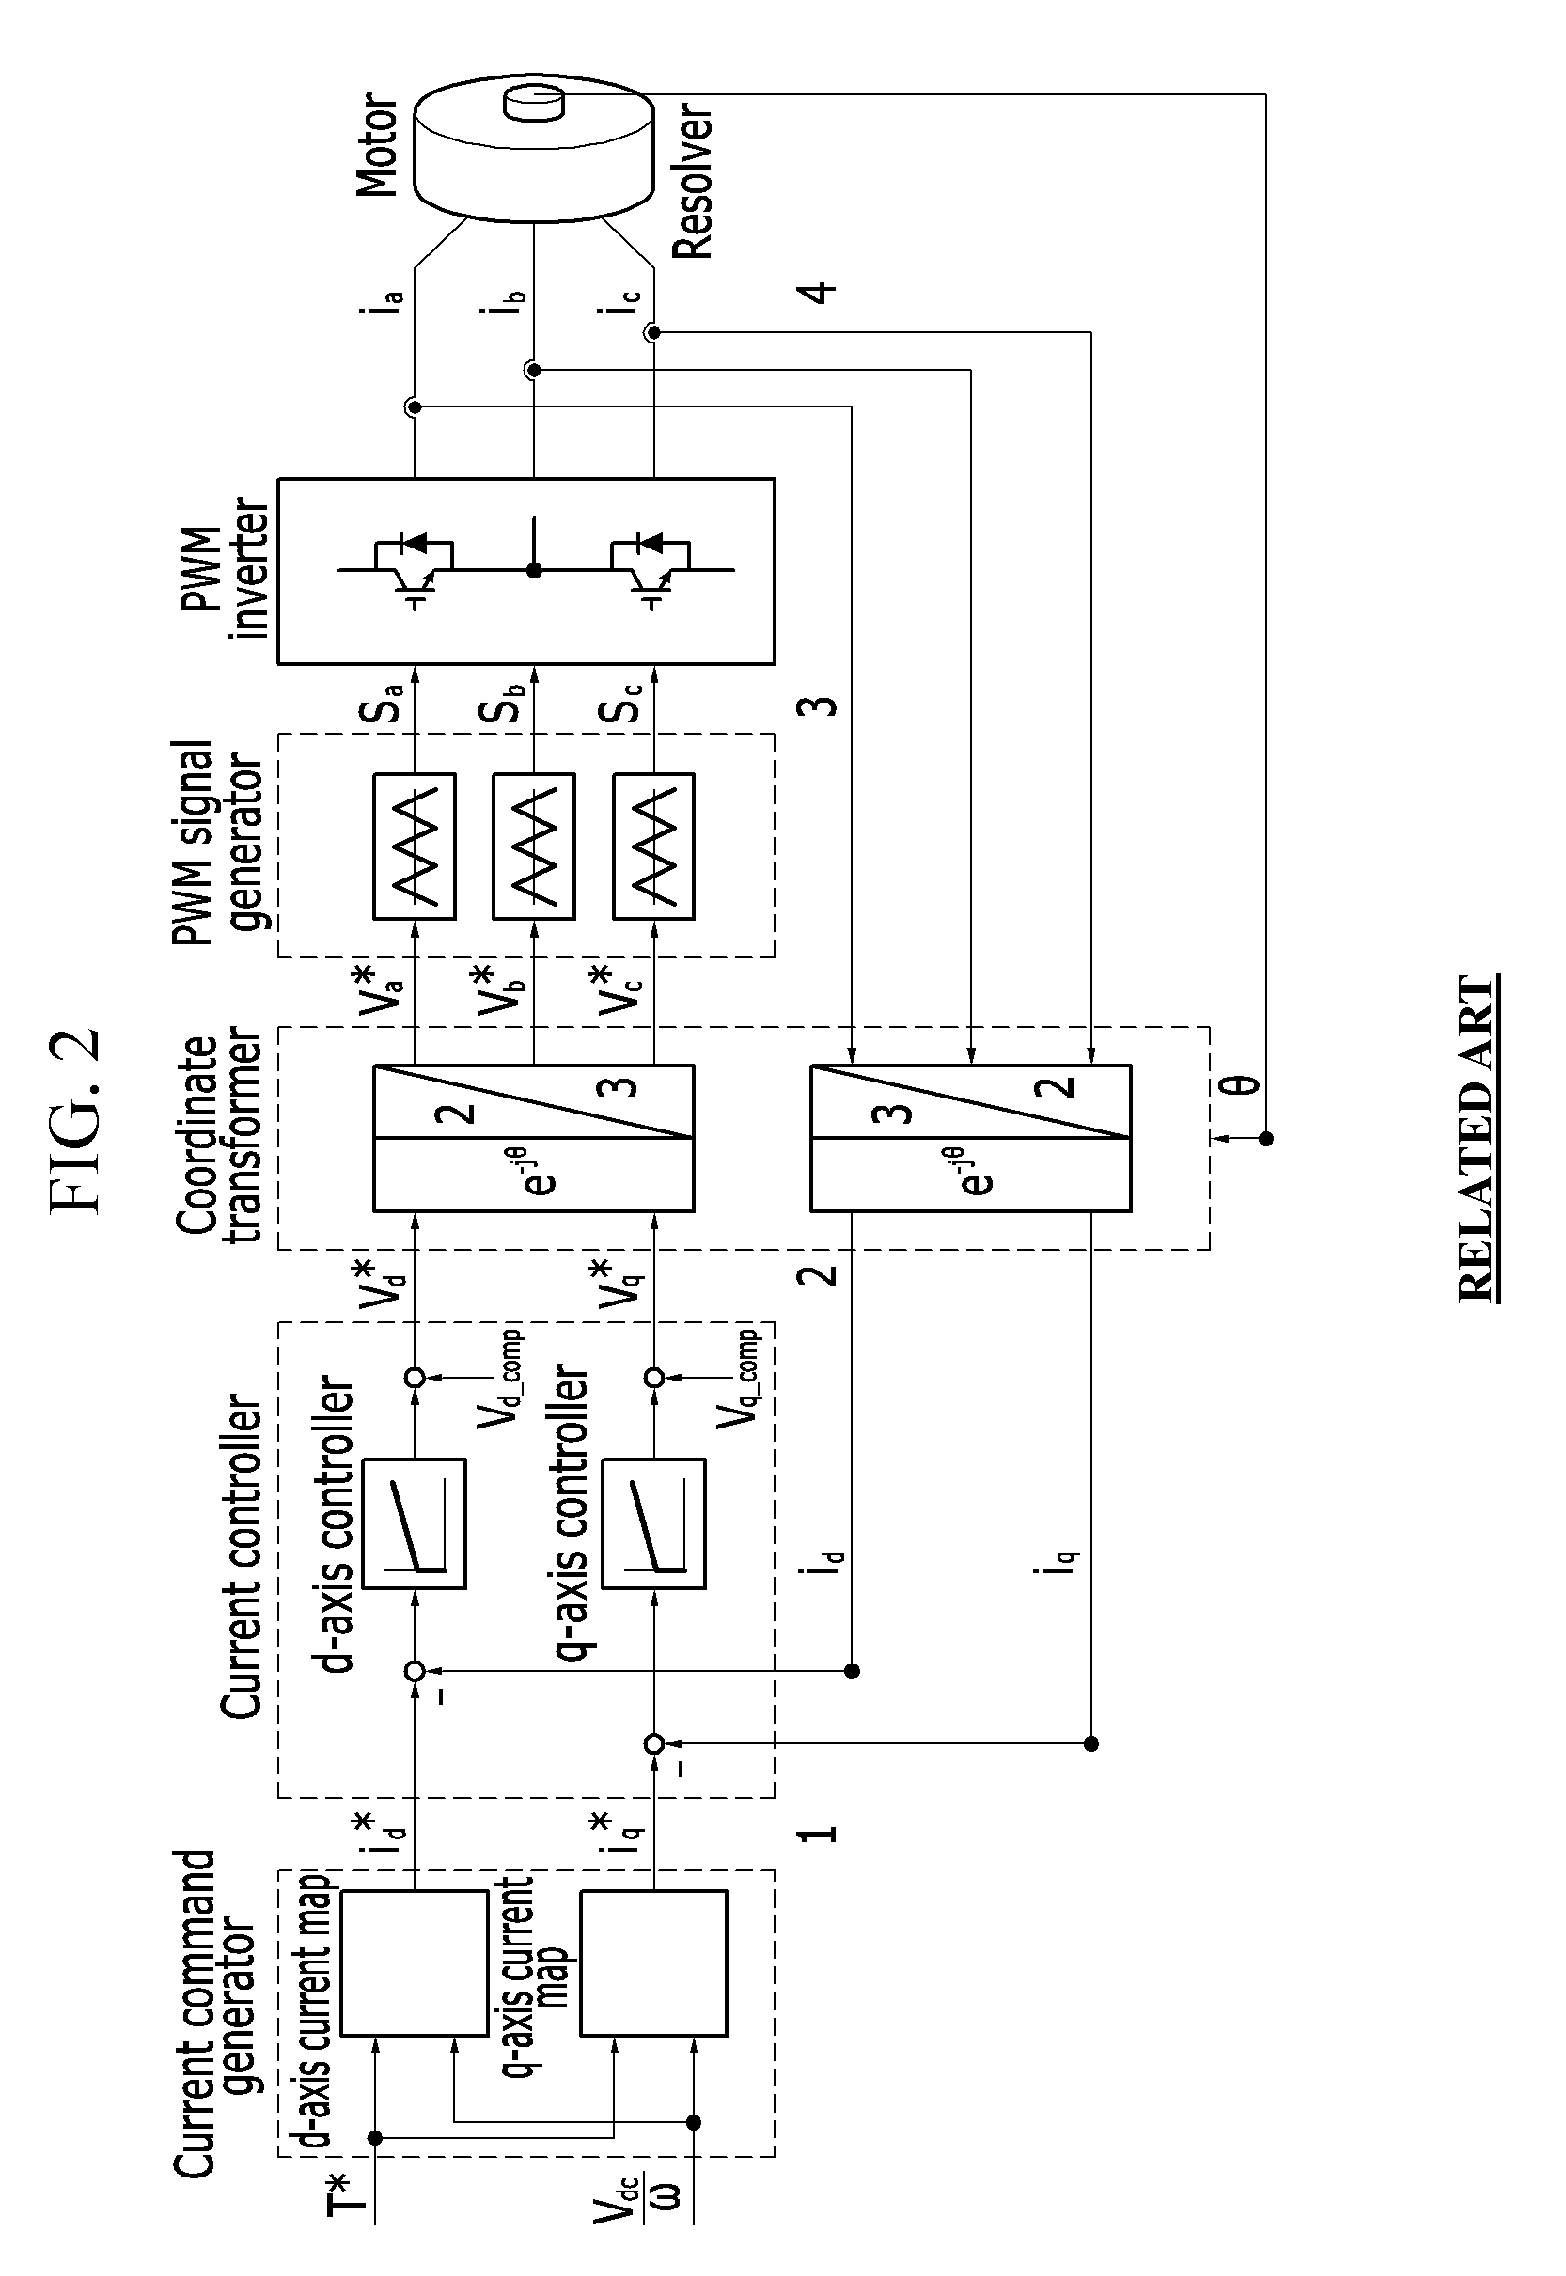 Motor control system and method for environmentally-friendly vehicle